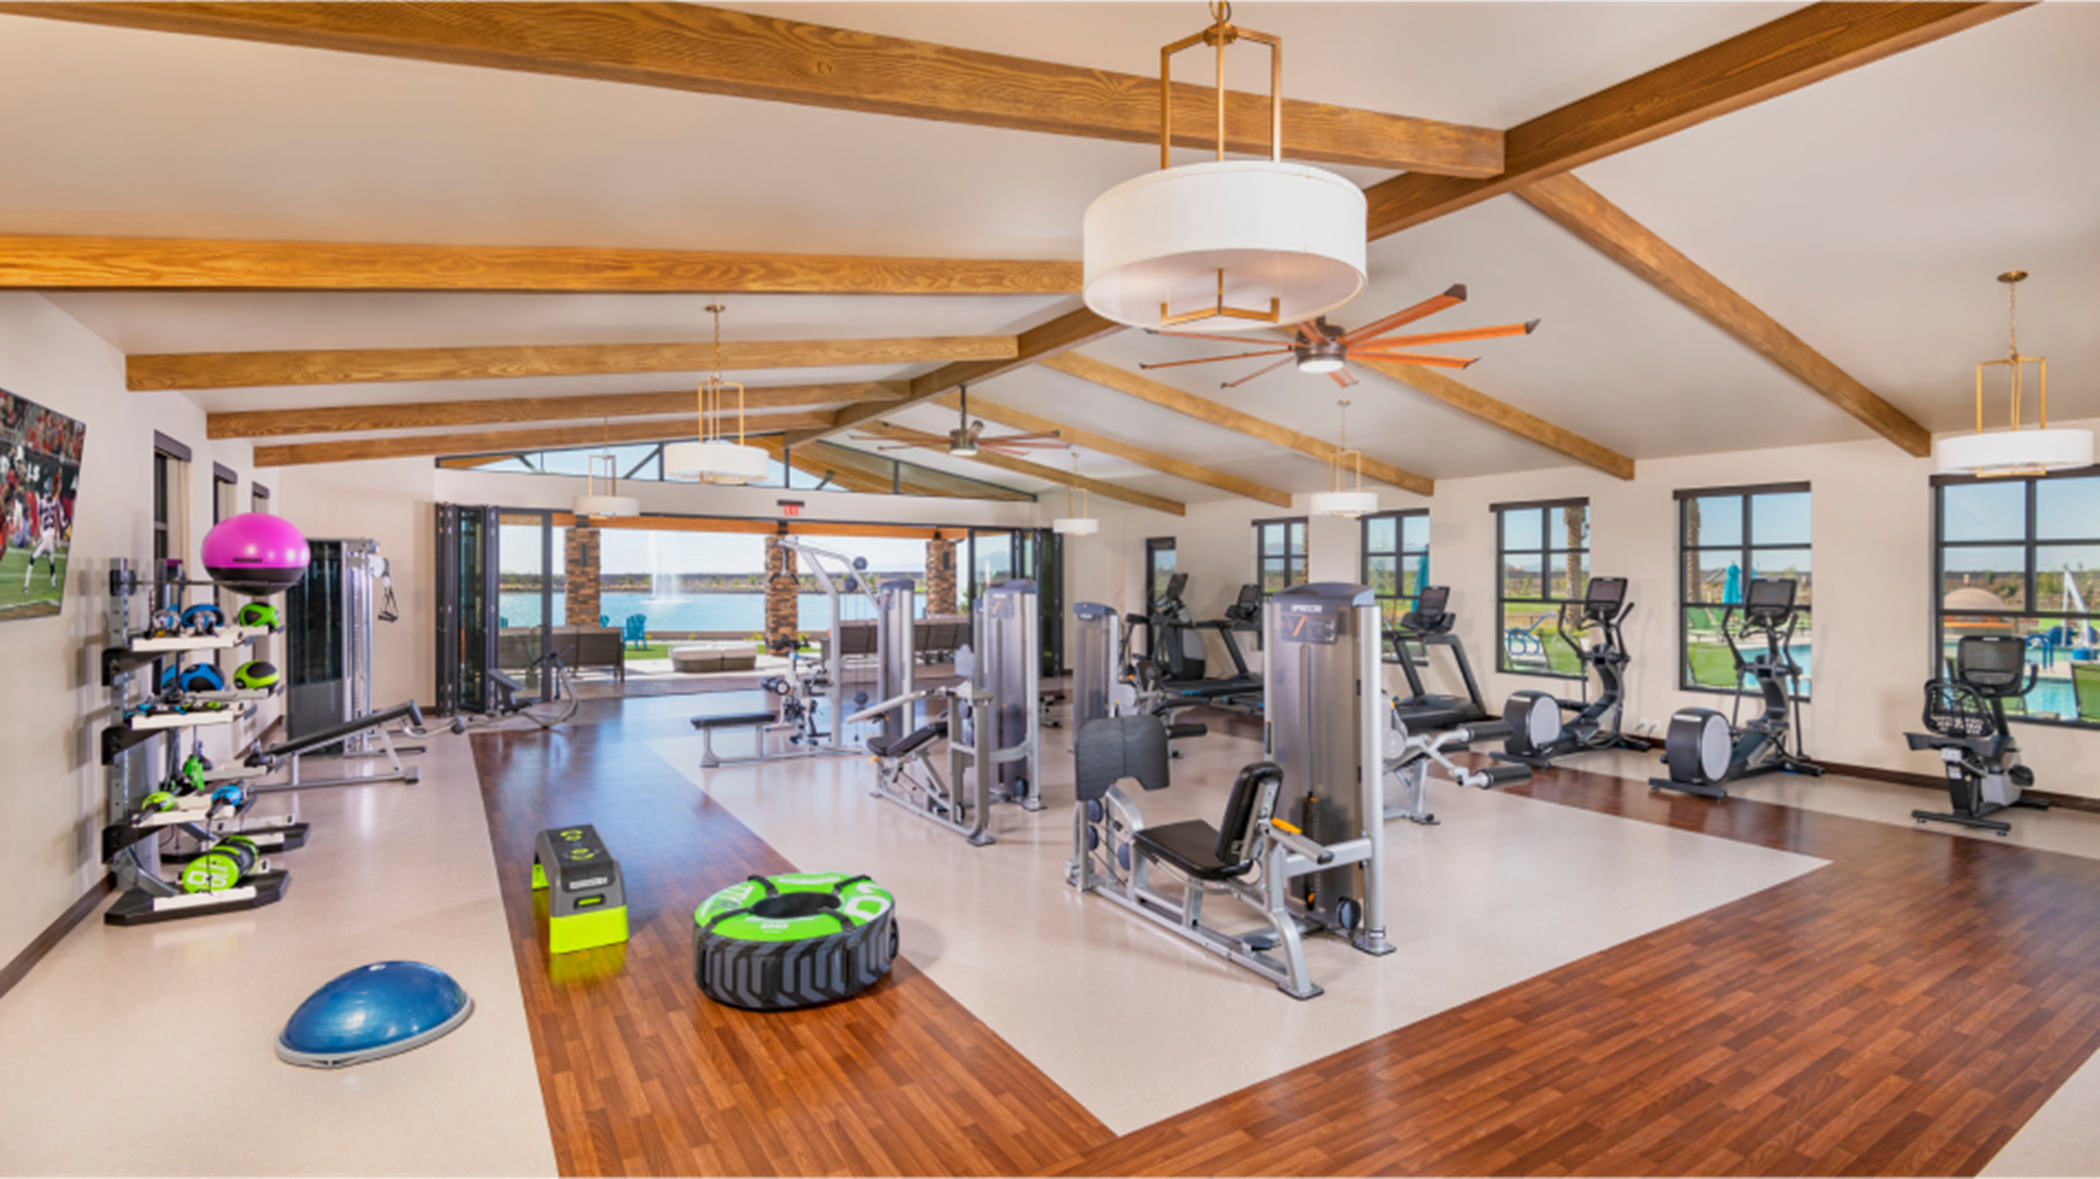 Fitness center interior with exercise machines